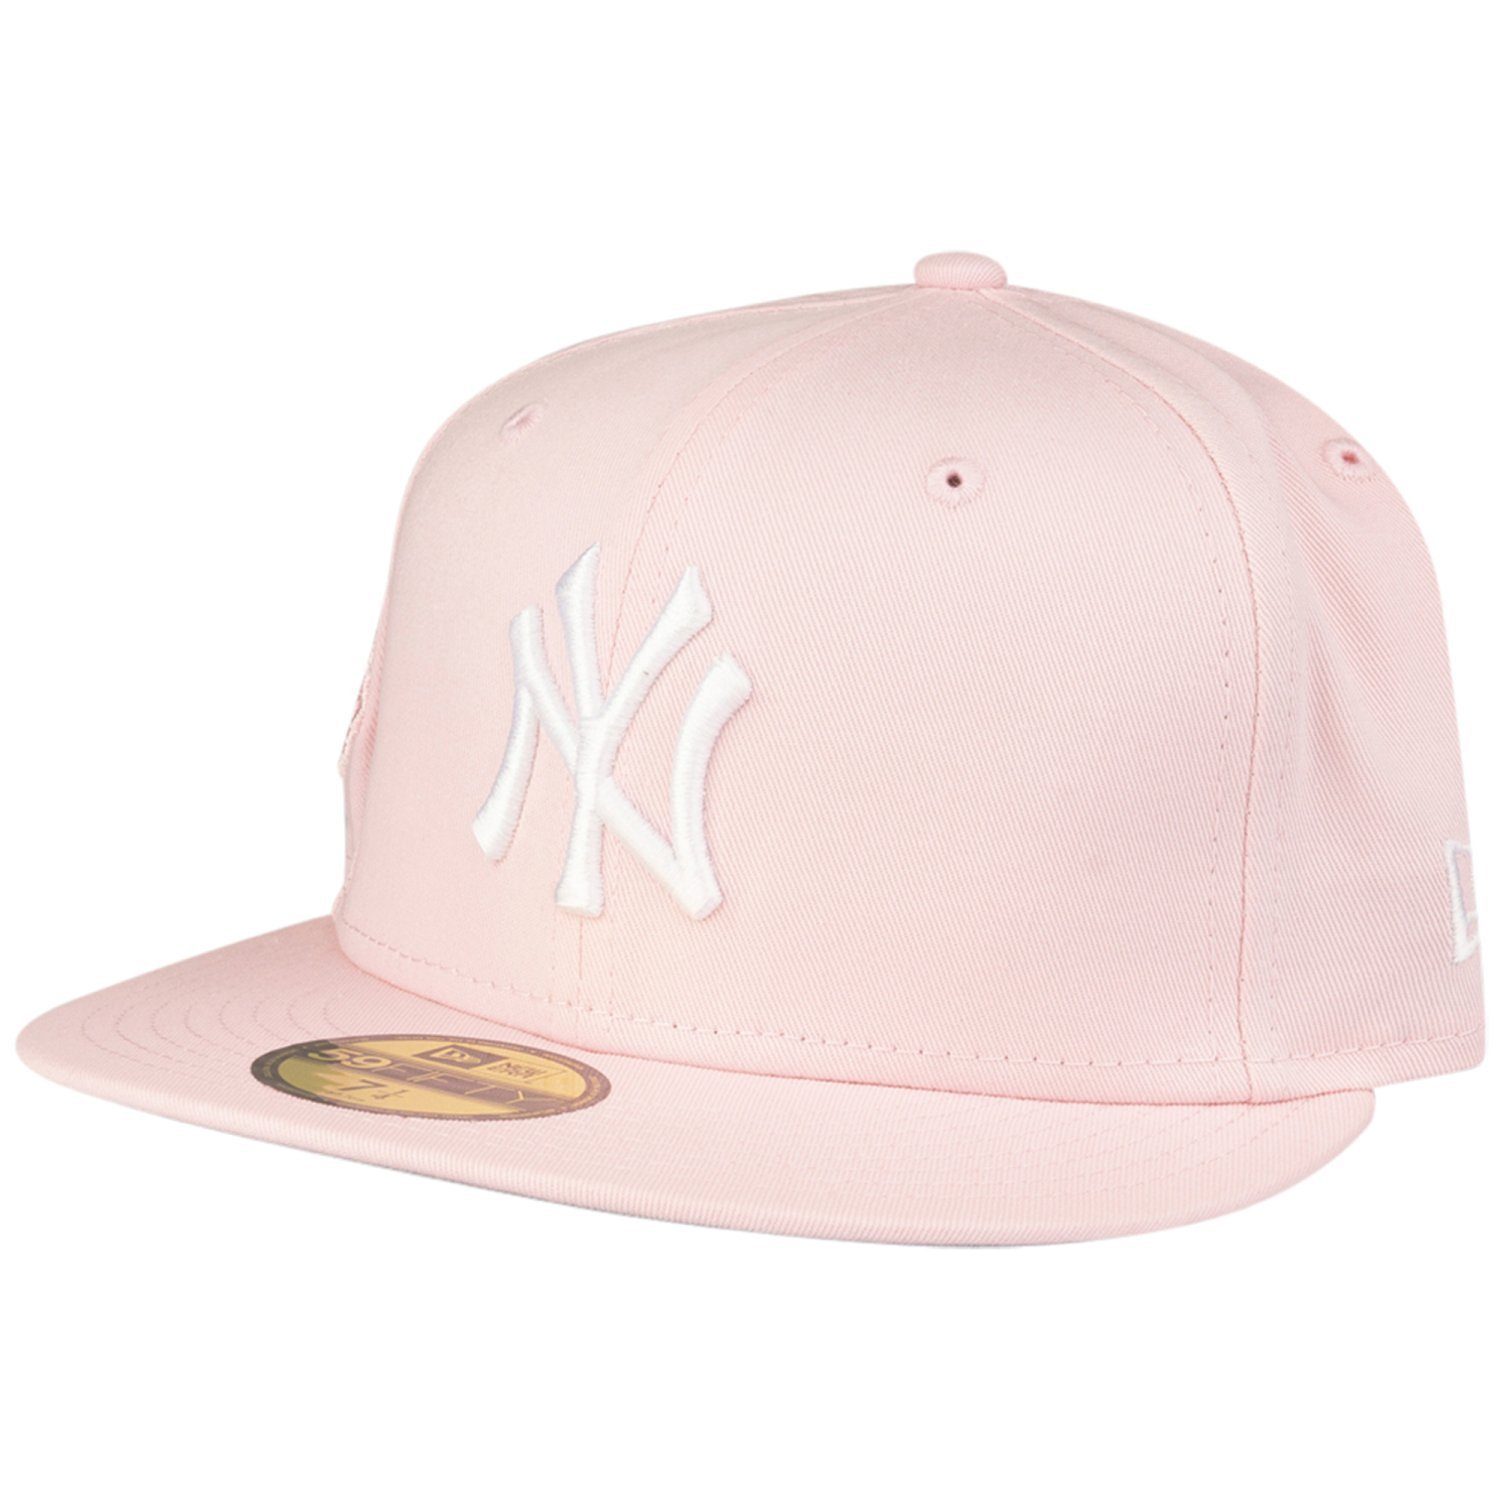 NY ANNIVERSARY 59Fifty New Cap Yankees 100 Fitted Era